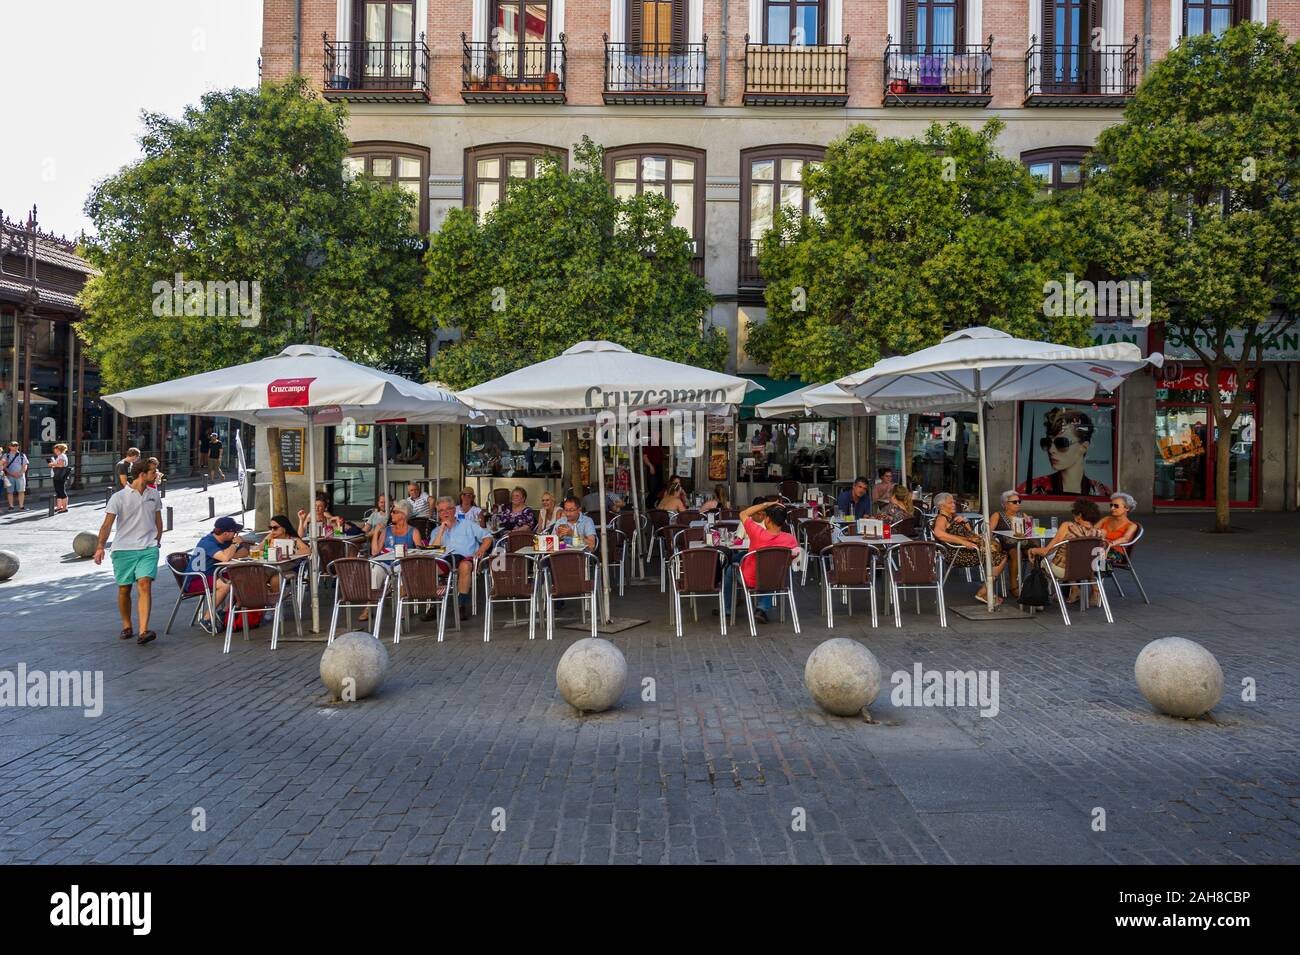 People sitting on chairs under big umbrellas eating and drinking on the pavement outside a restaurant in Madrid, Spain Stock Photo